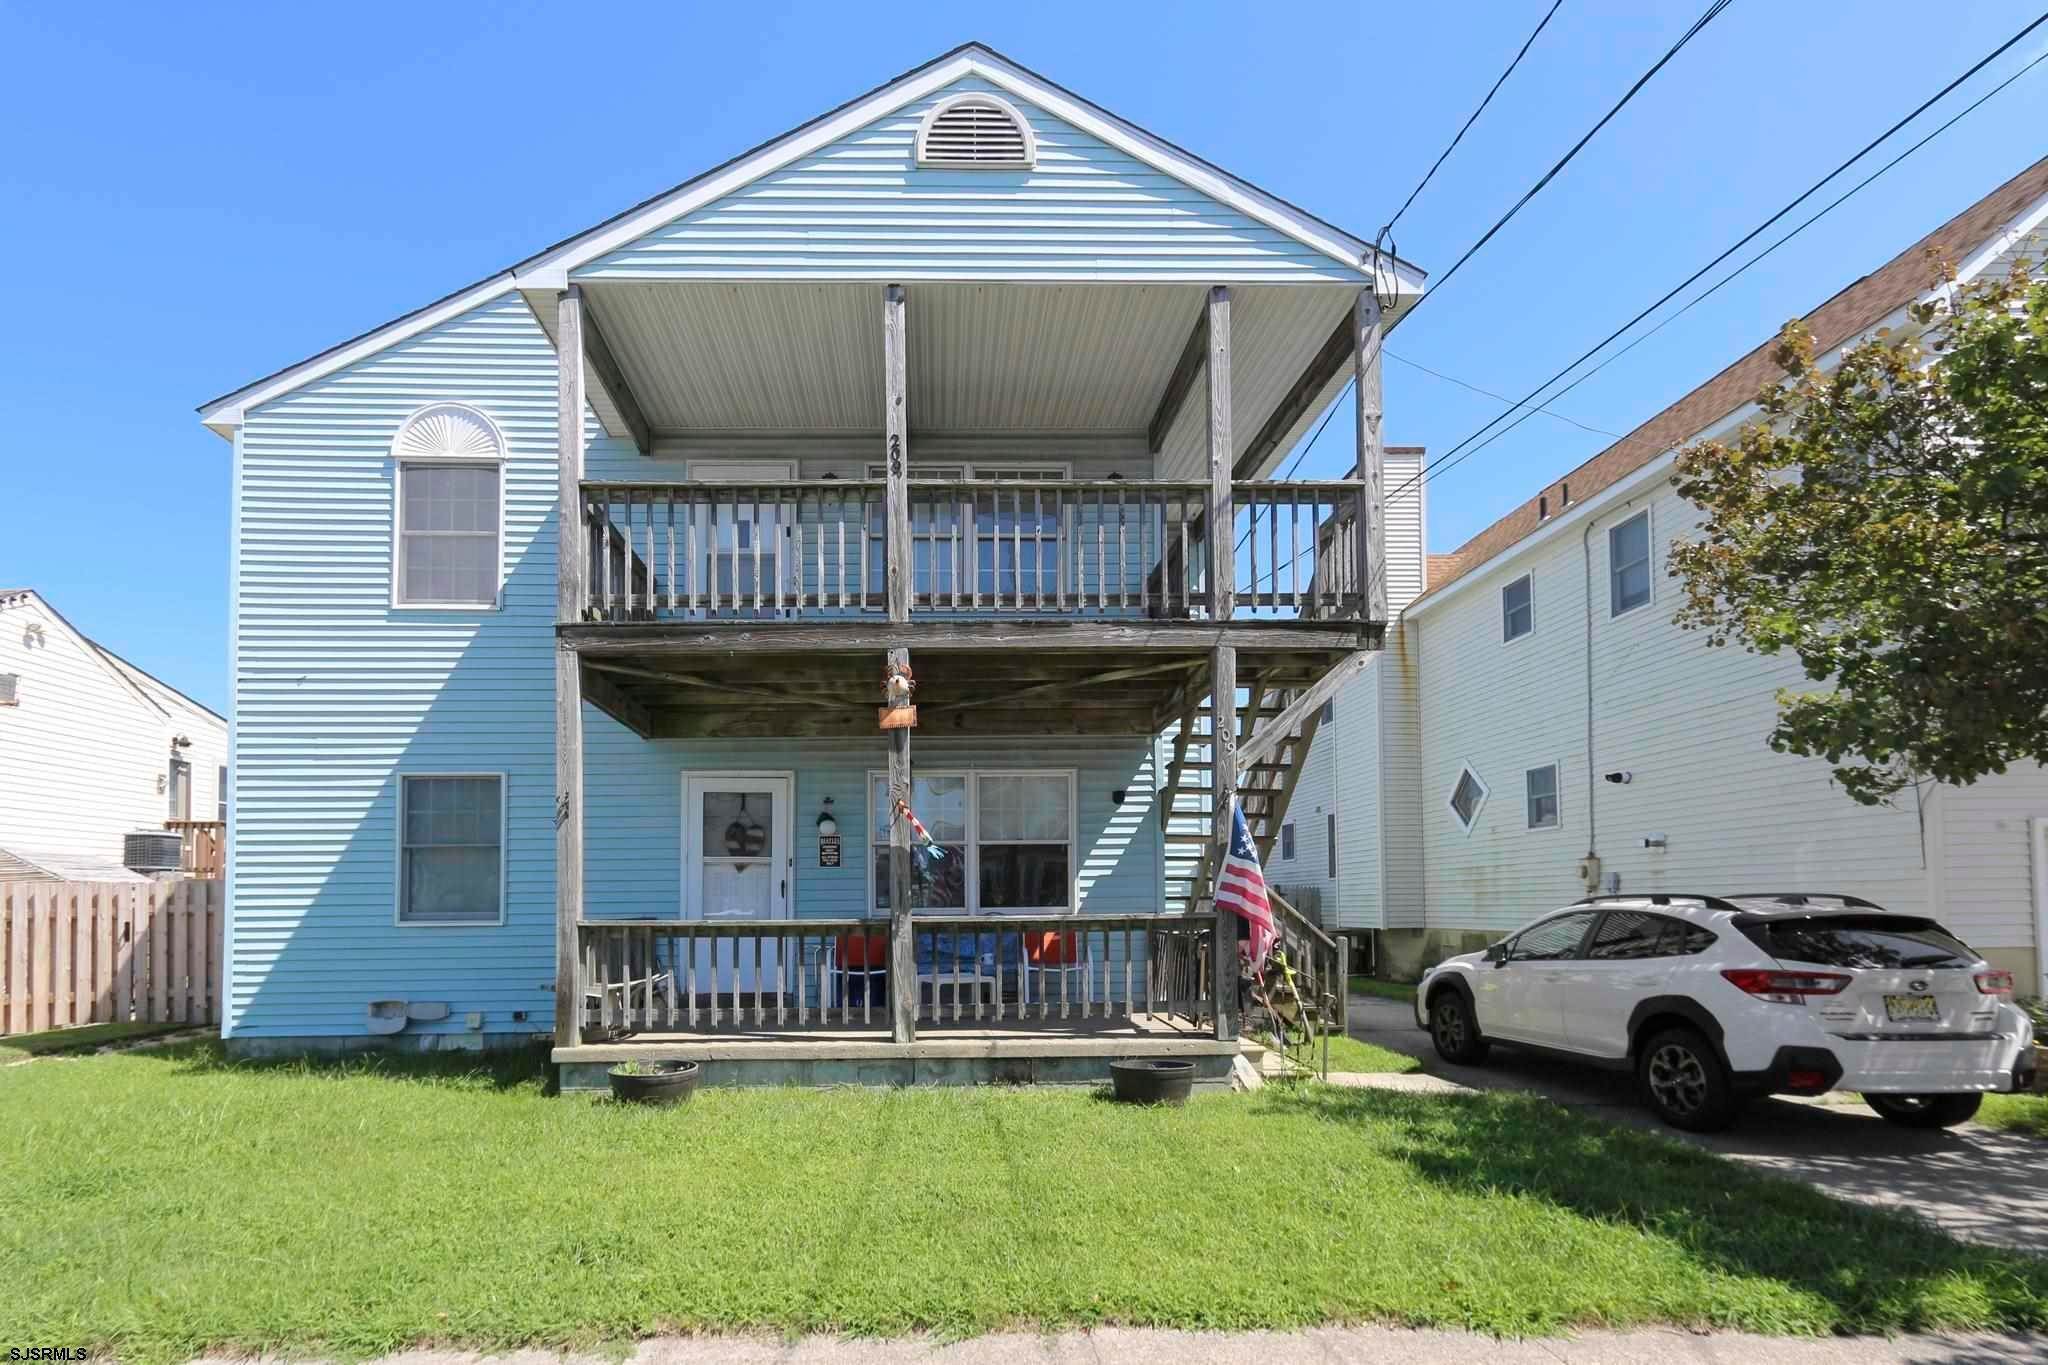 Multi-Family Homes for Sale at 209 N Dudley Avenue Ventnor, New Jersey 08406 United States